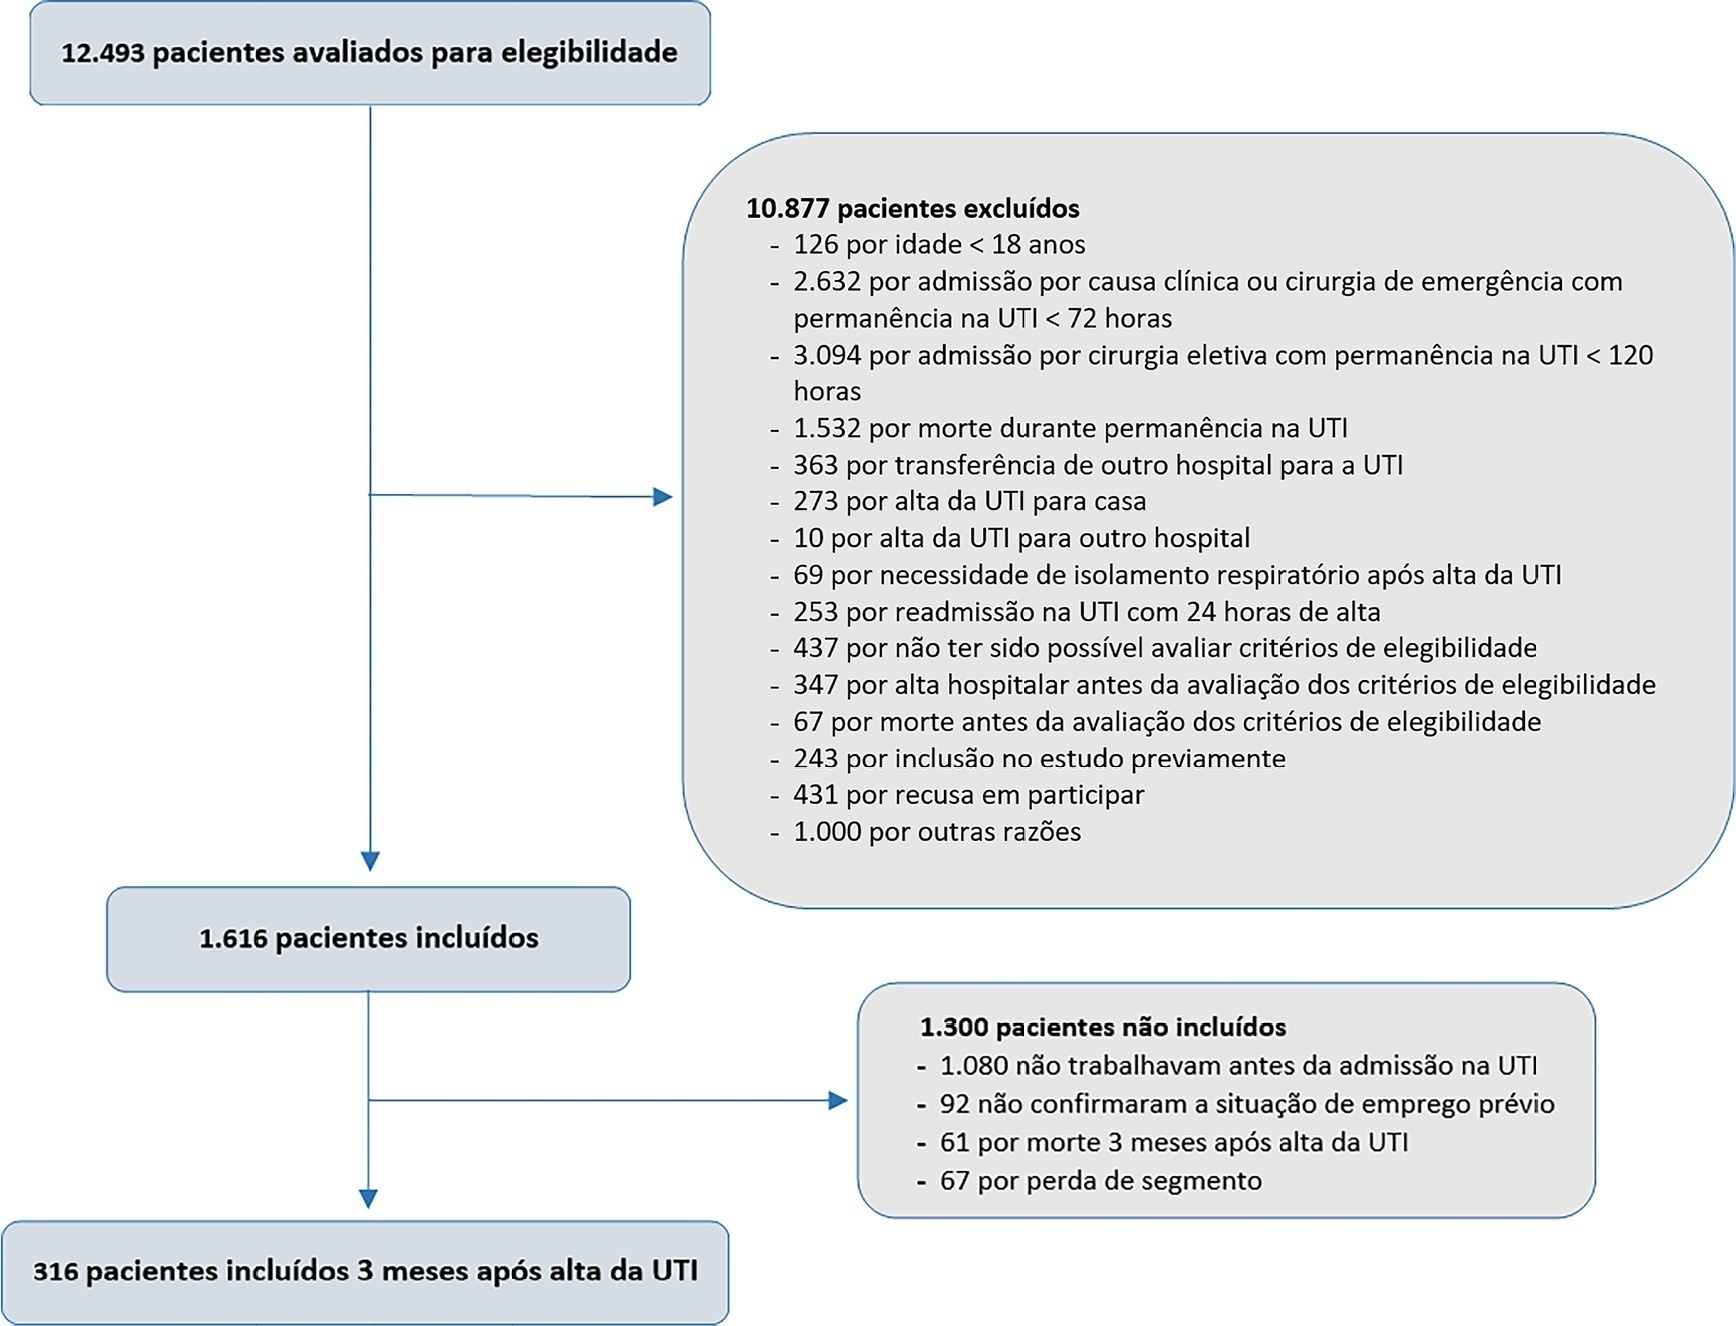 Return to work after discharge from the intensive care unit: a Brazilian multicenter cohort